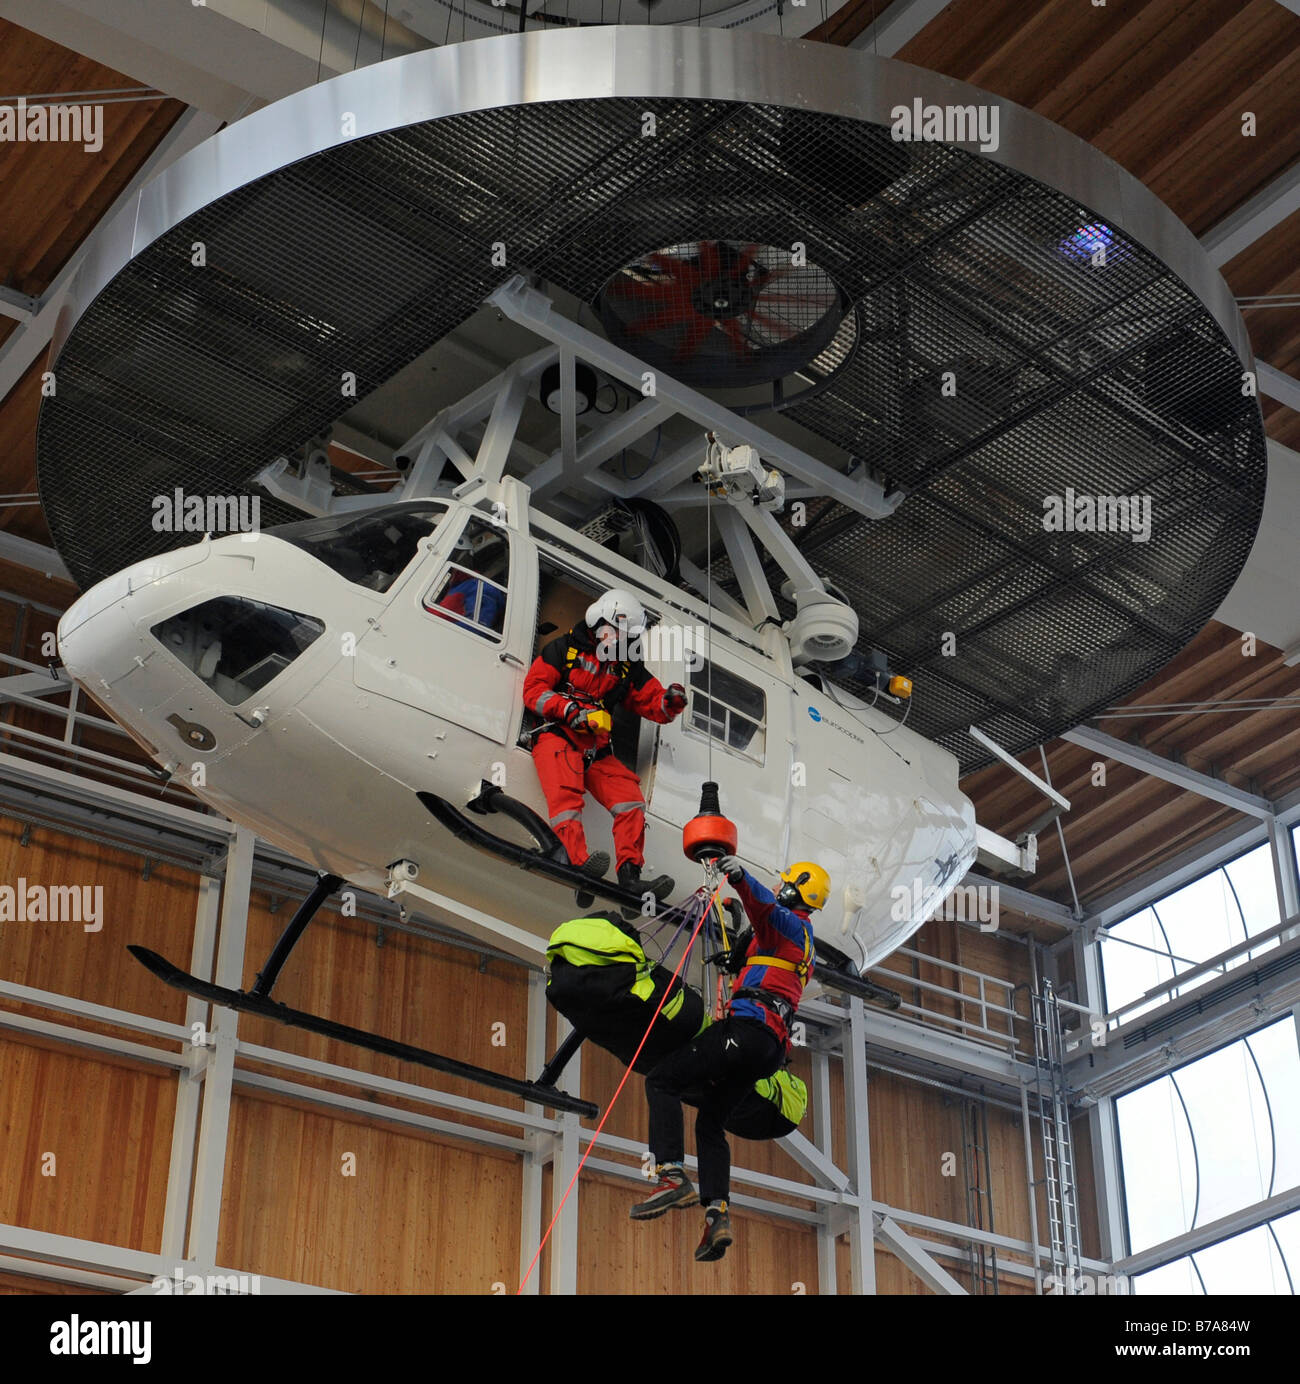 Rescue drill in a helicopter simulator of the mountain rescue service center for safety and training in Bad Toelz, Bavaria, Ger Stock Photo